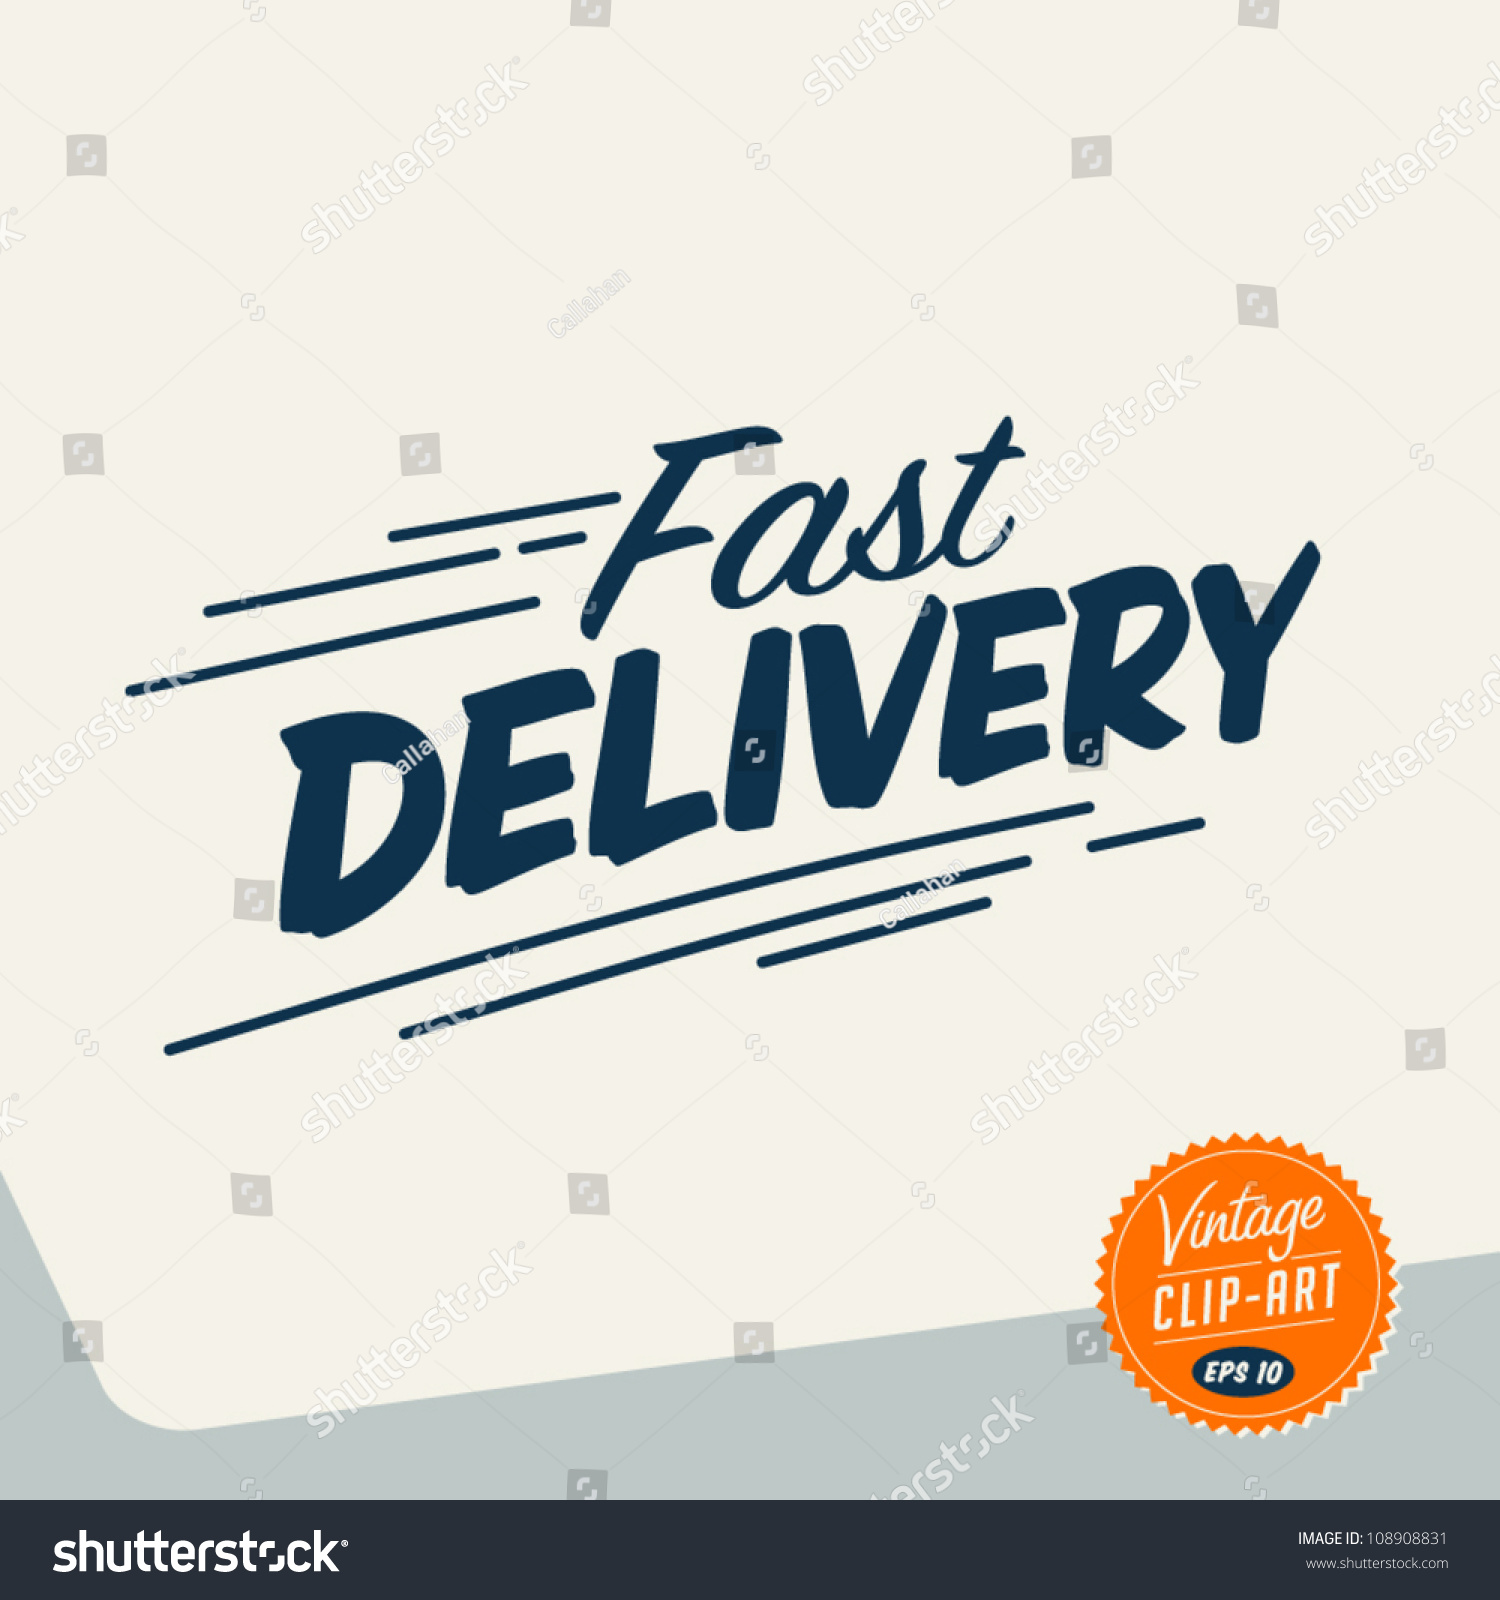 express delivery clipart - photo #12